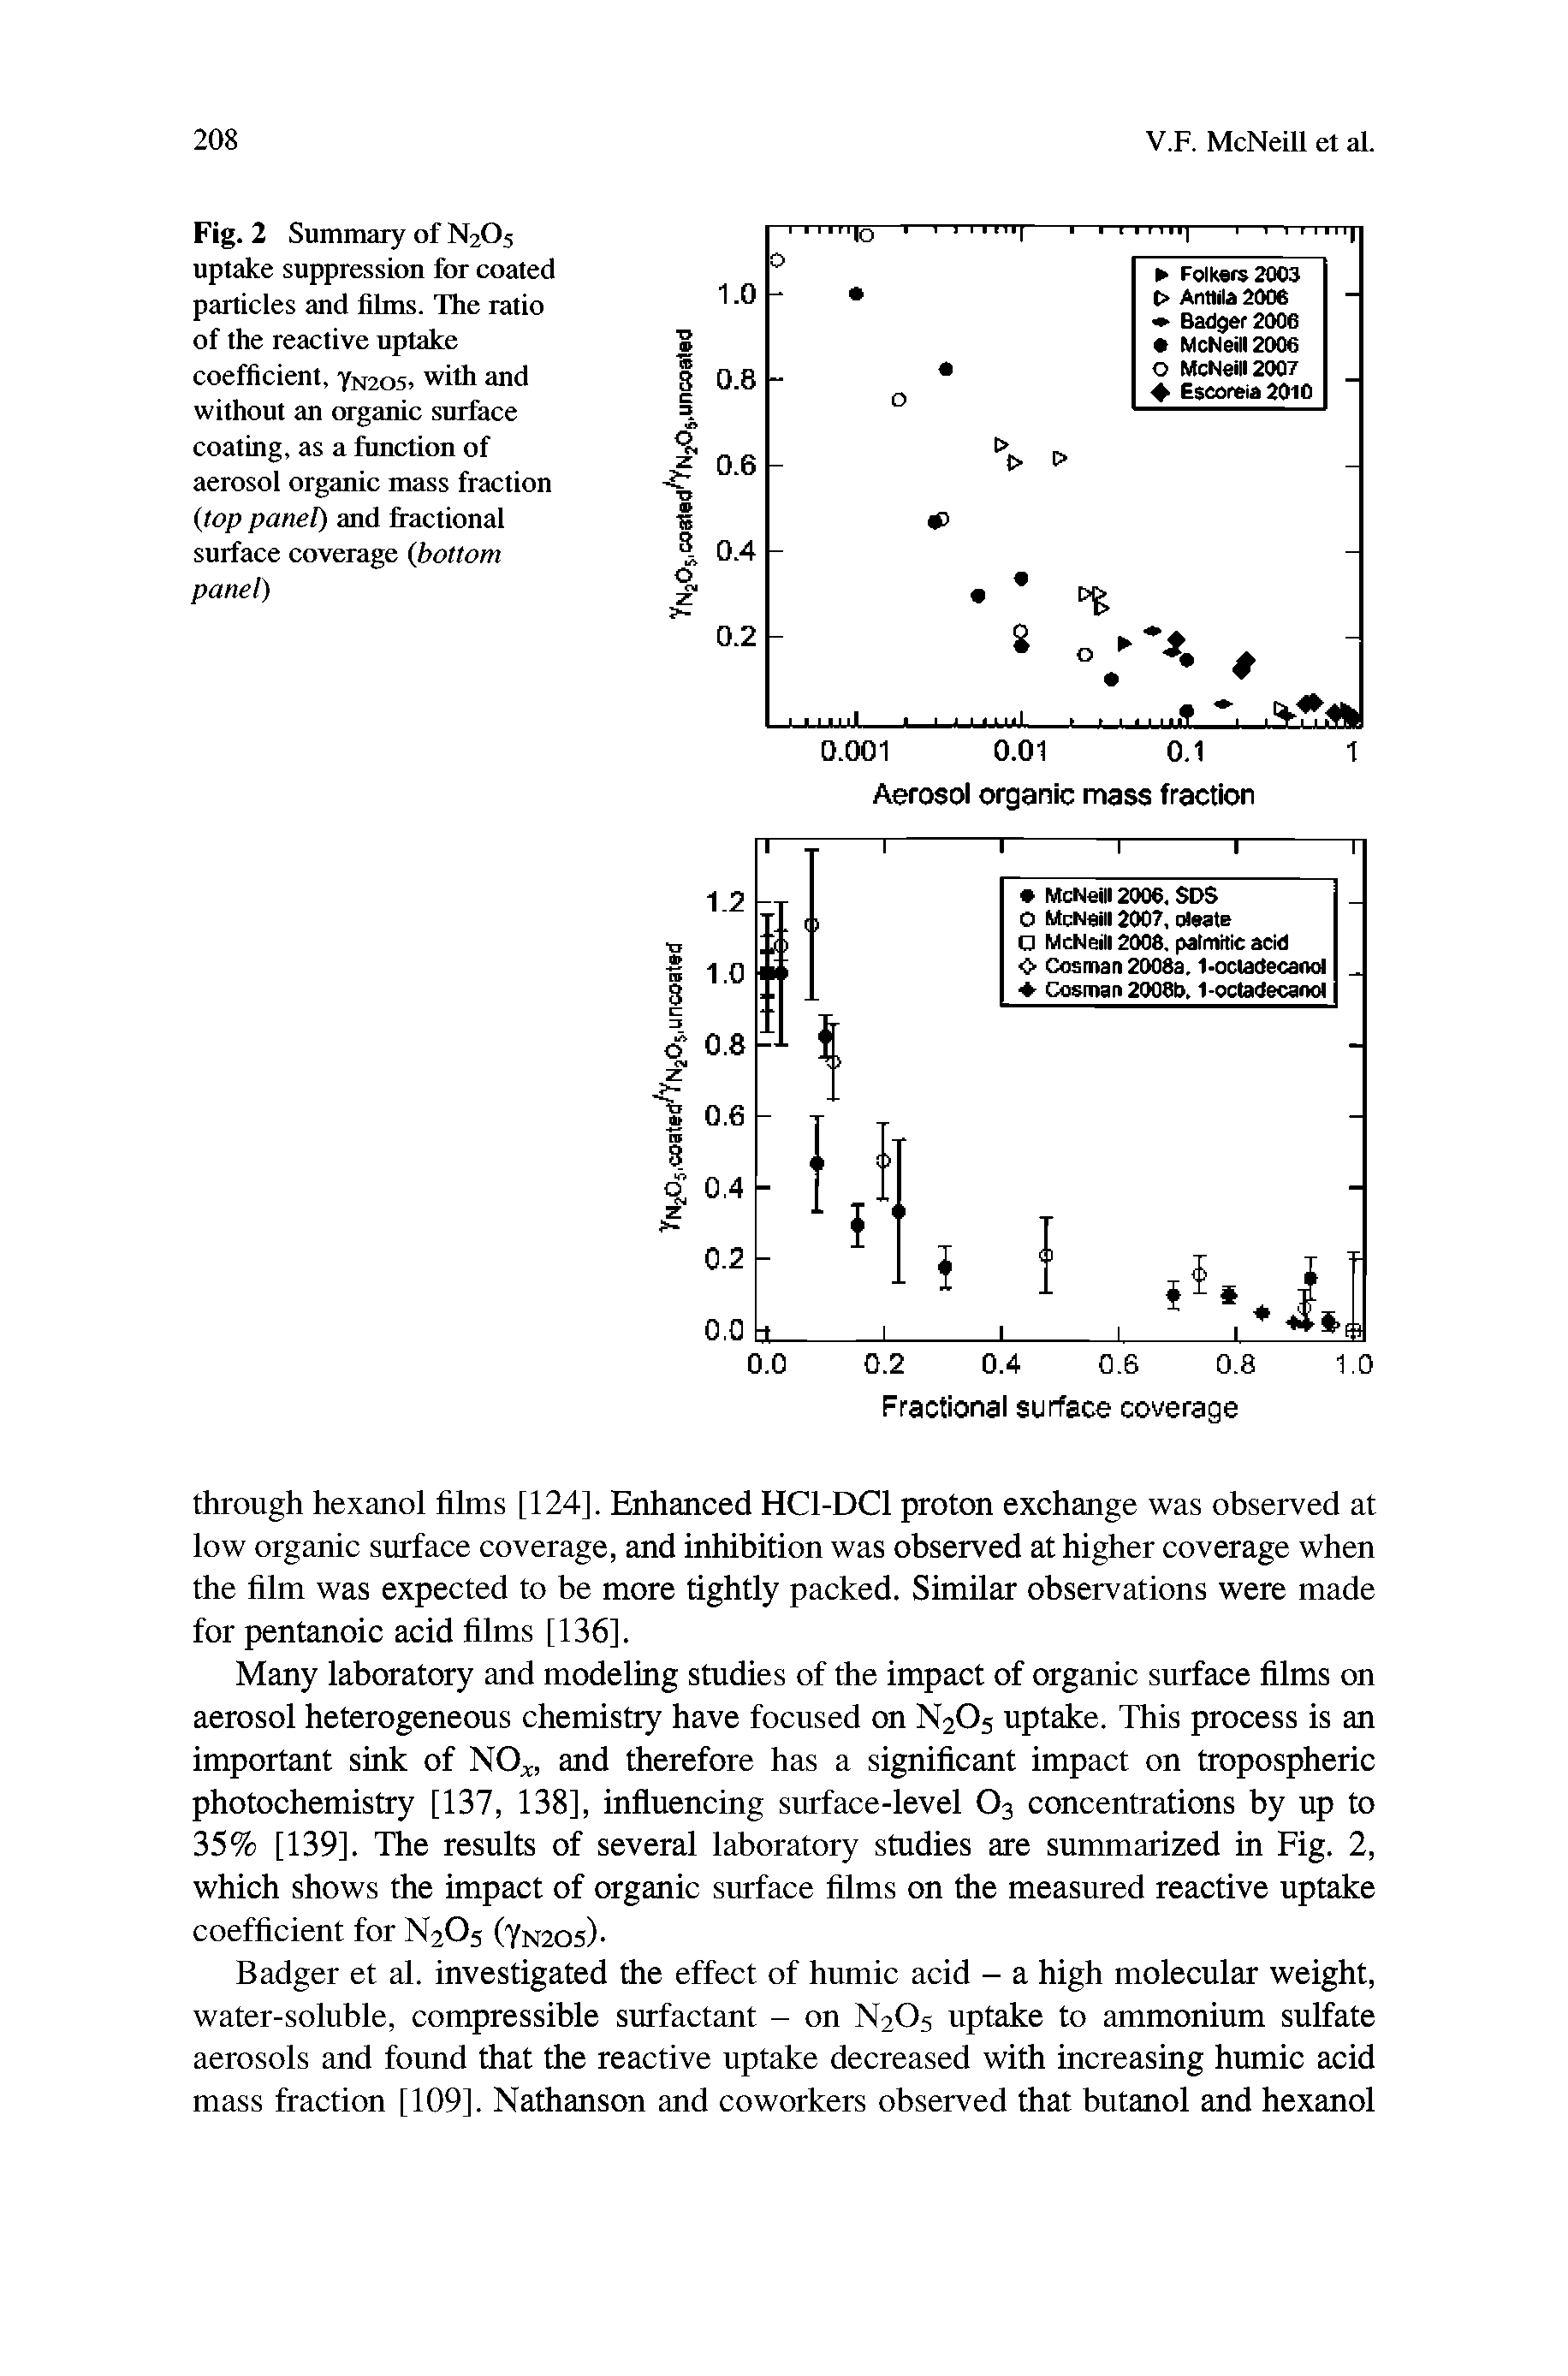 Fig. 2 Summary of N2O5 uptake suppression for coated particles and films. The ratio of the reactive uptake coefficient, YN205. with and without an organic surface coating, as a function of aerosol organic mass fraction top panel) and liactional surface coverage bottom panel)...